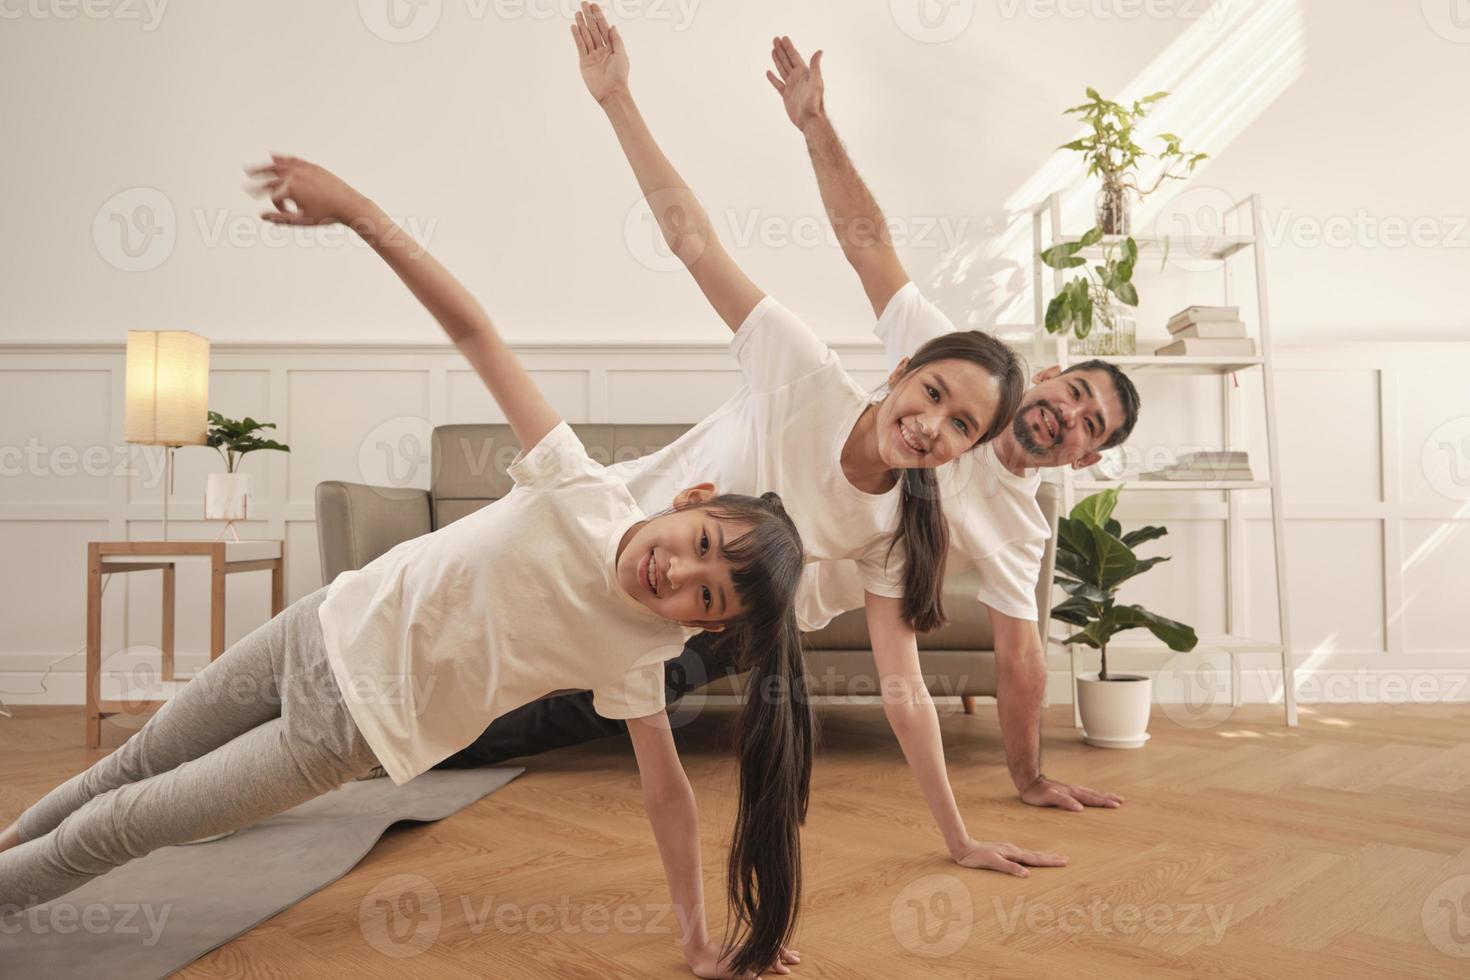 Asian Thai parents and daughter fitness training exercise and practice yoga on living room floor, lovely rowing together for health and wellness, and happy domestic home lifestyle on family weekend. photo